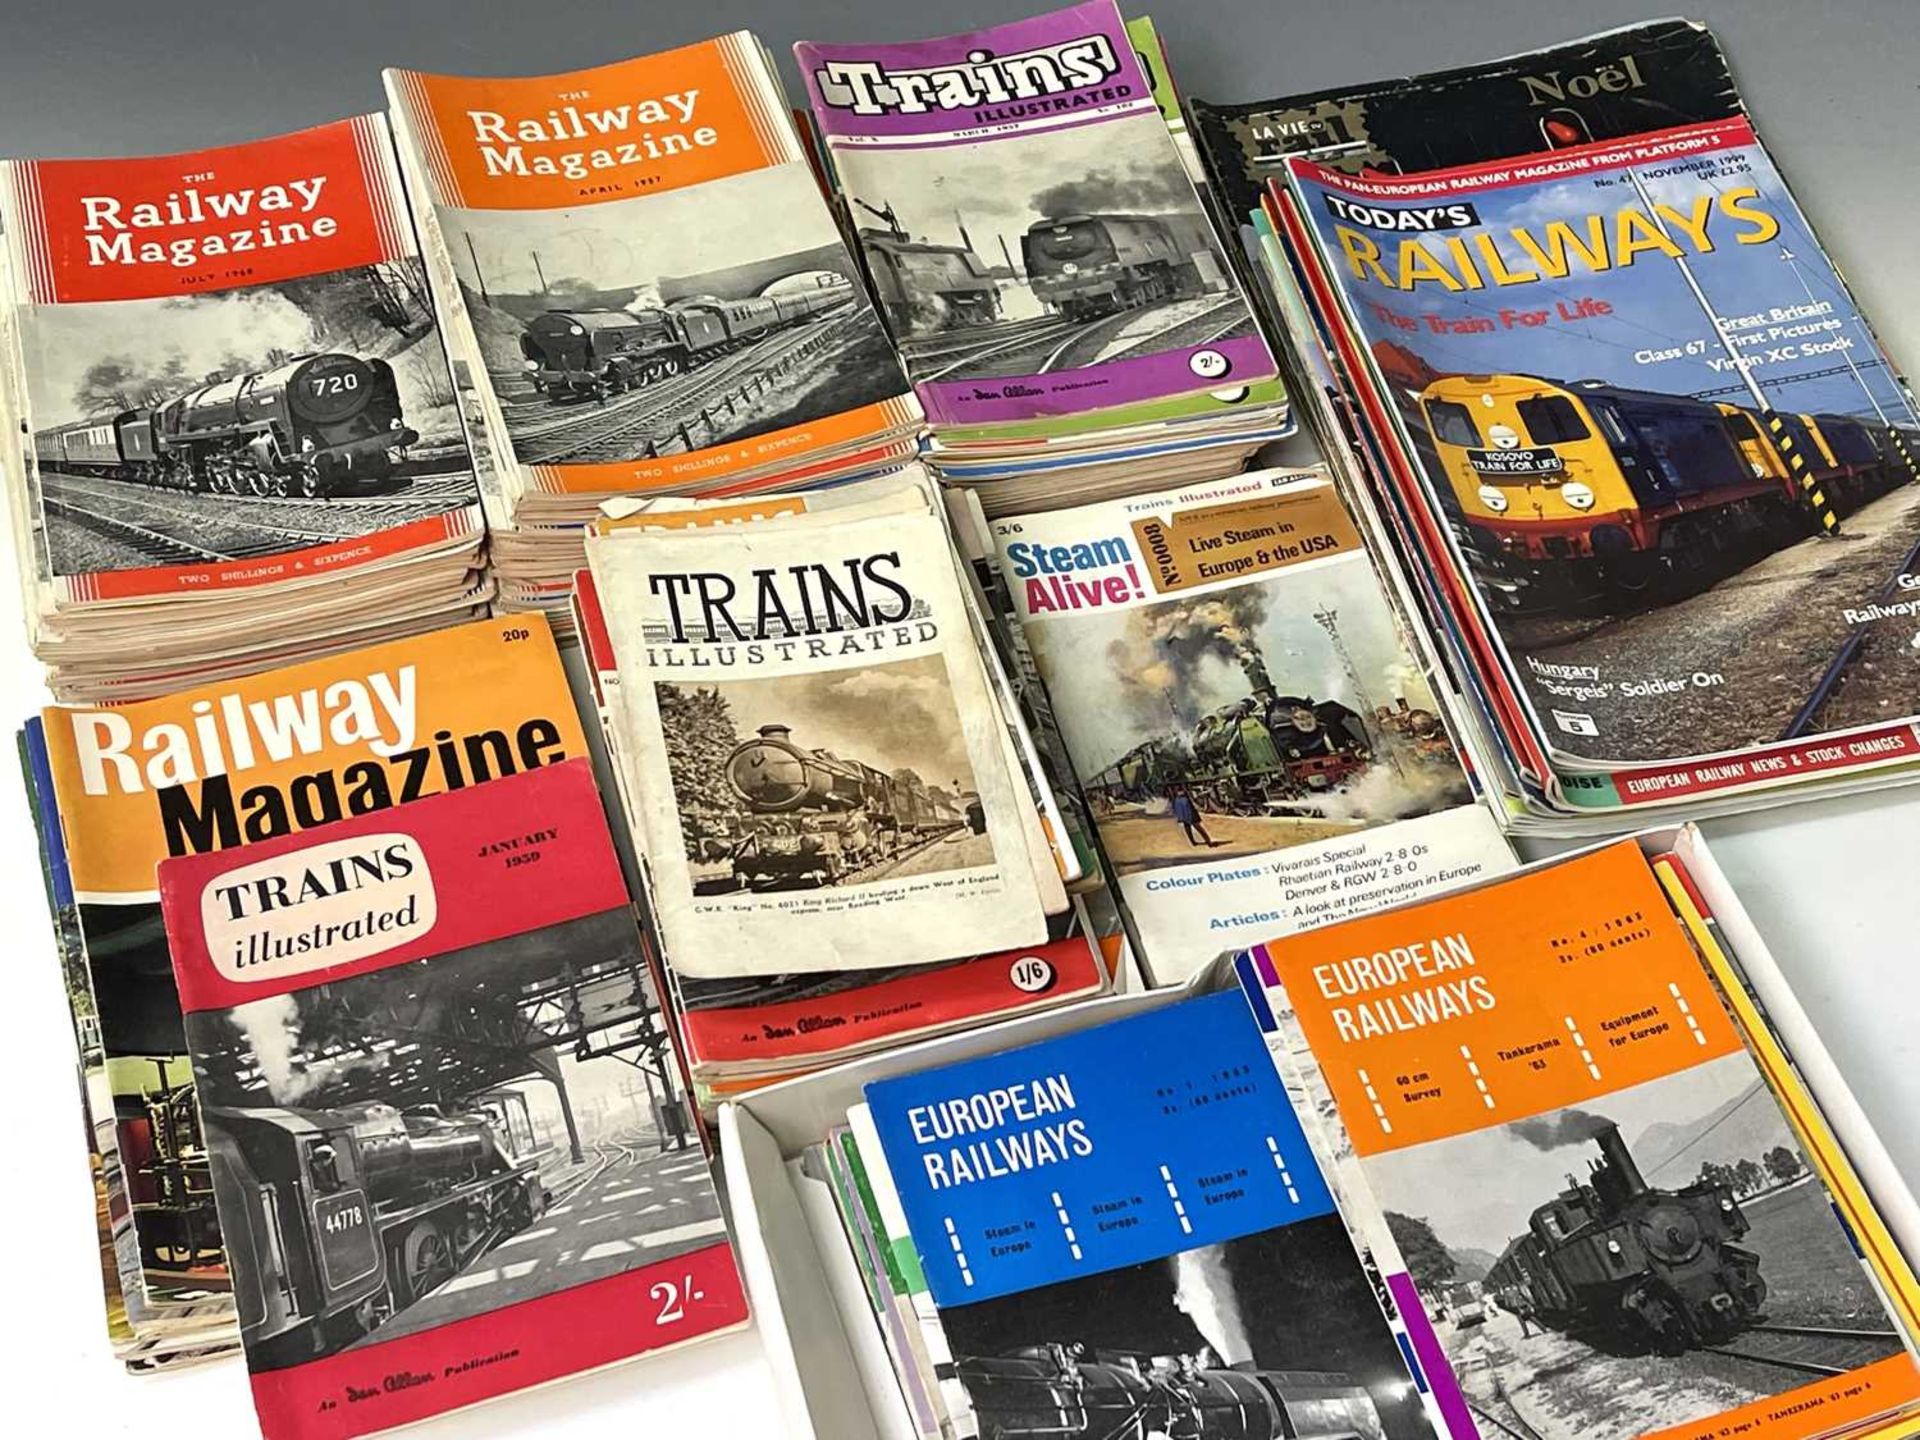 Railway Magazines - Great Britain & Trams. Large box containing "Trains Illustrated" from the 1940' - Image 4 of 5